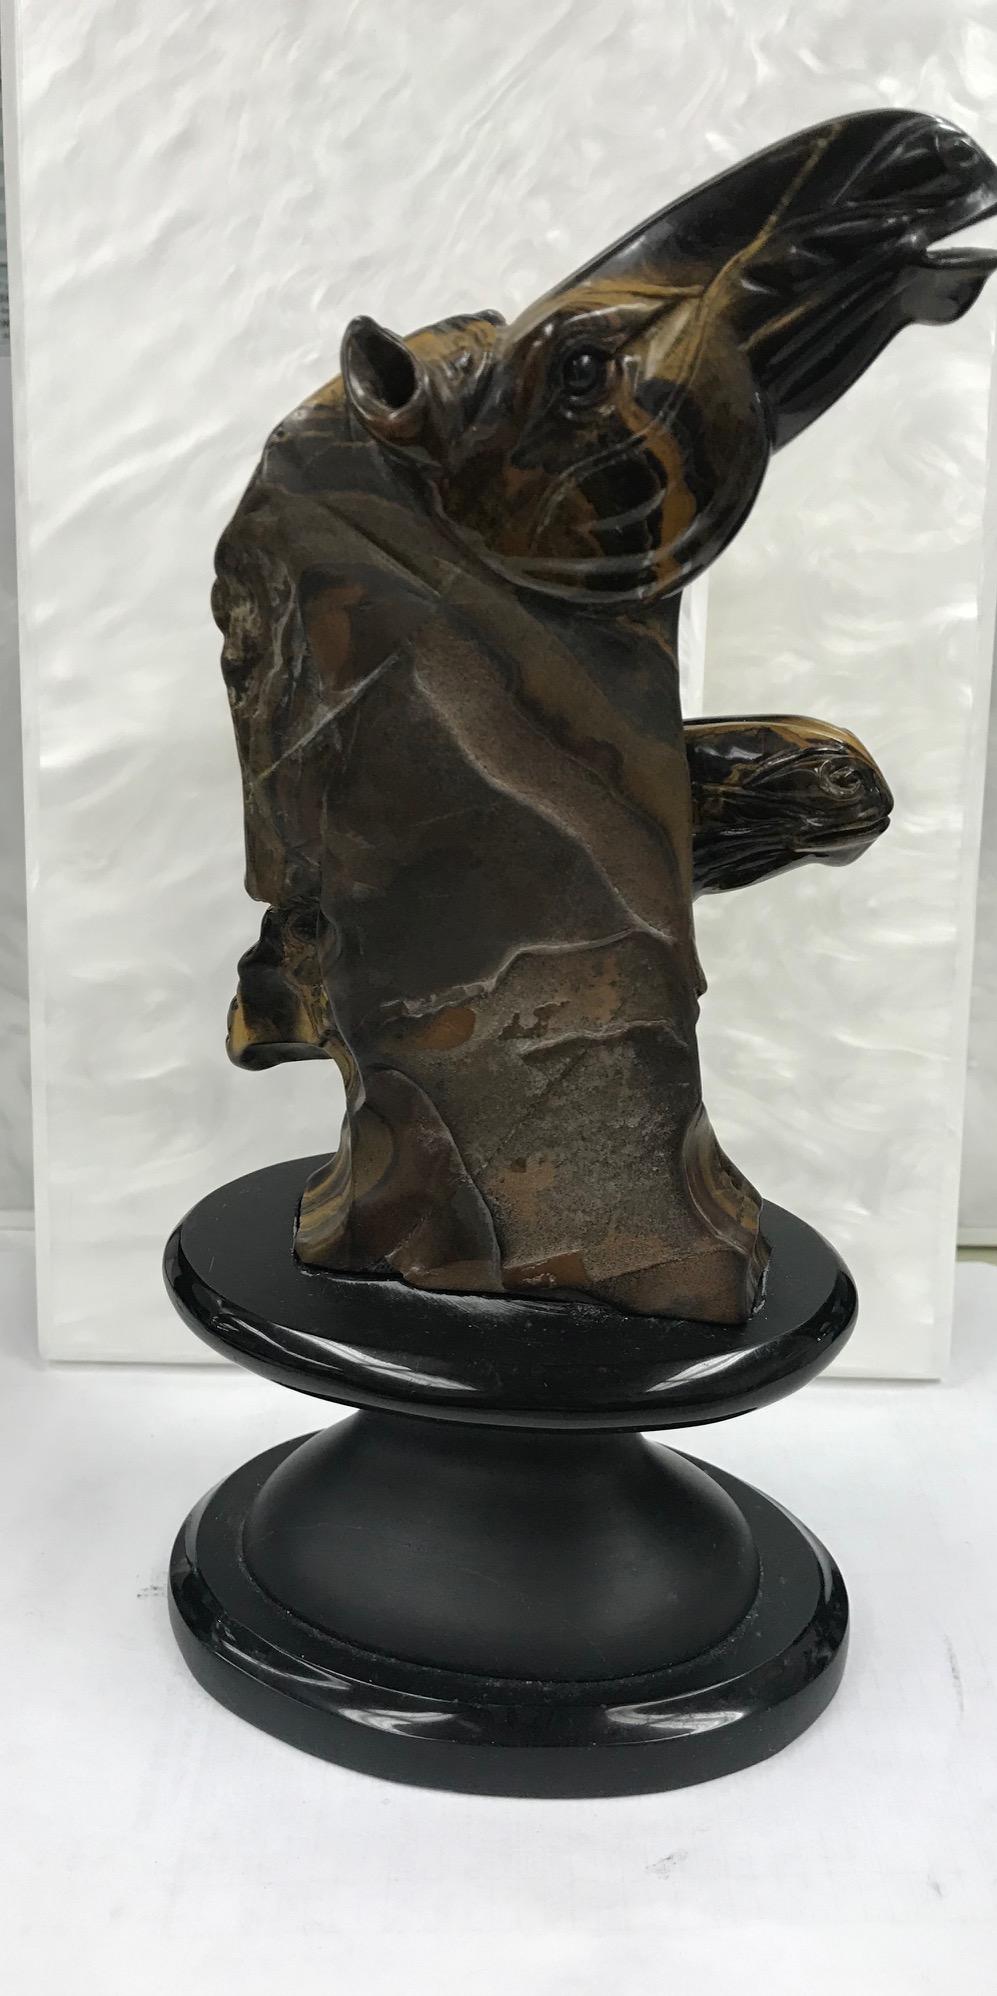 This stunning Golden Tiger Eye sculpture has a double horse head.
It sits on a black oval stand that is approximatly 4.5